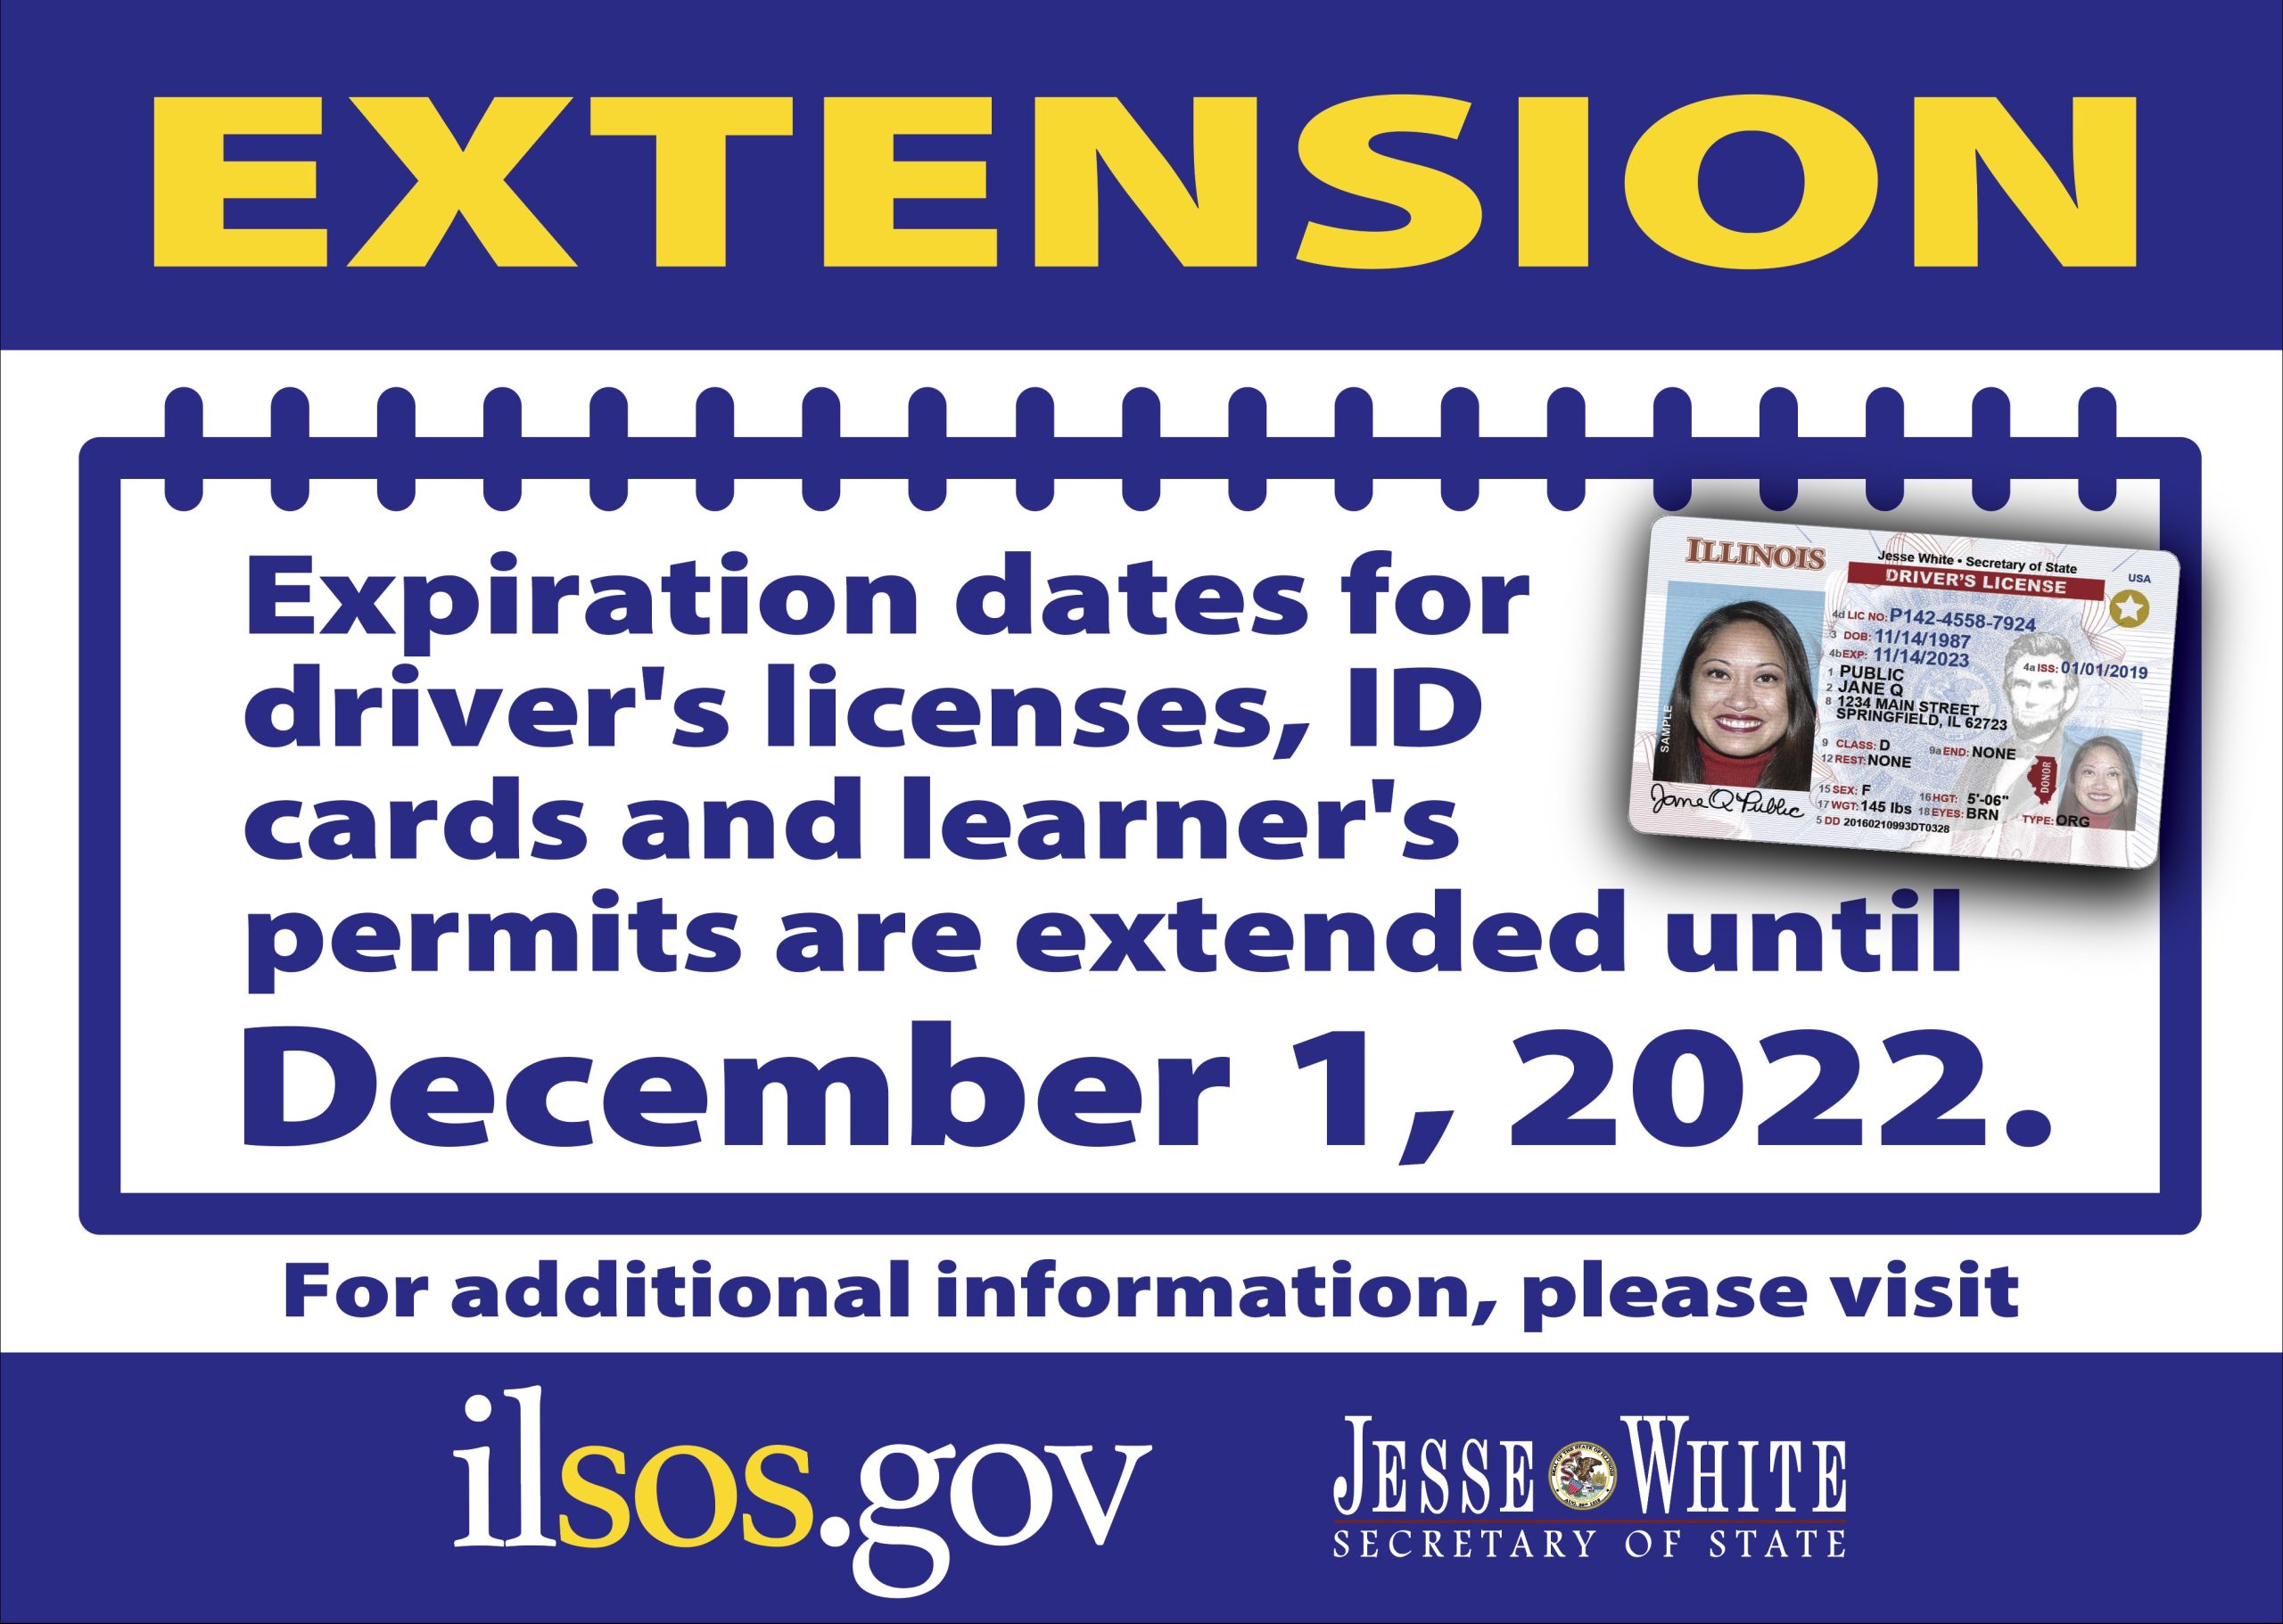 Jesse White Extending Drivers License and ID Card Expiration Dates until December 1, 2022 picture